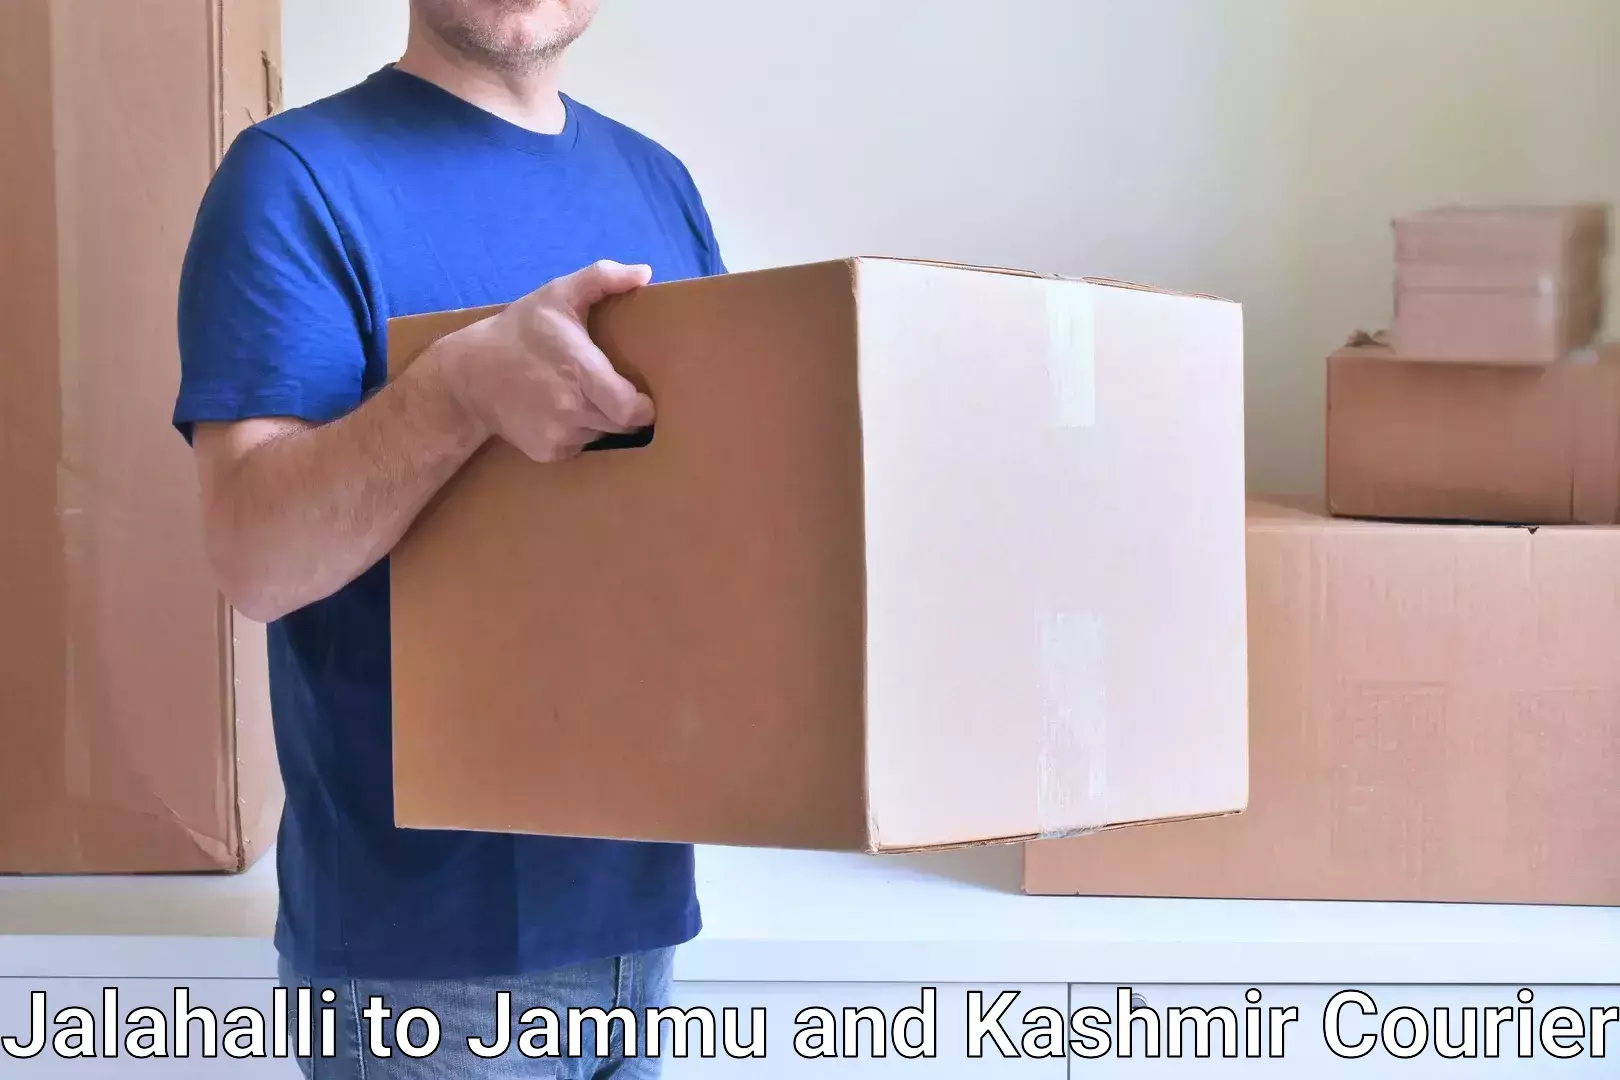 Courier rate comparison in Jalahalli to Udhampur